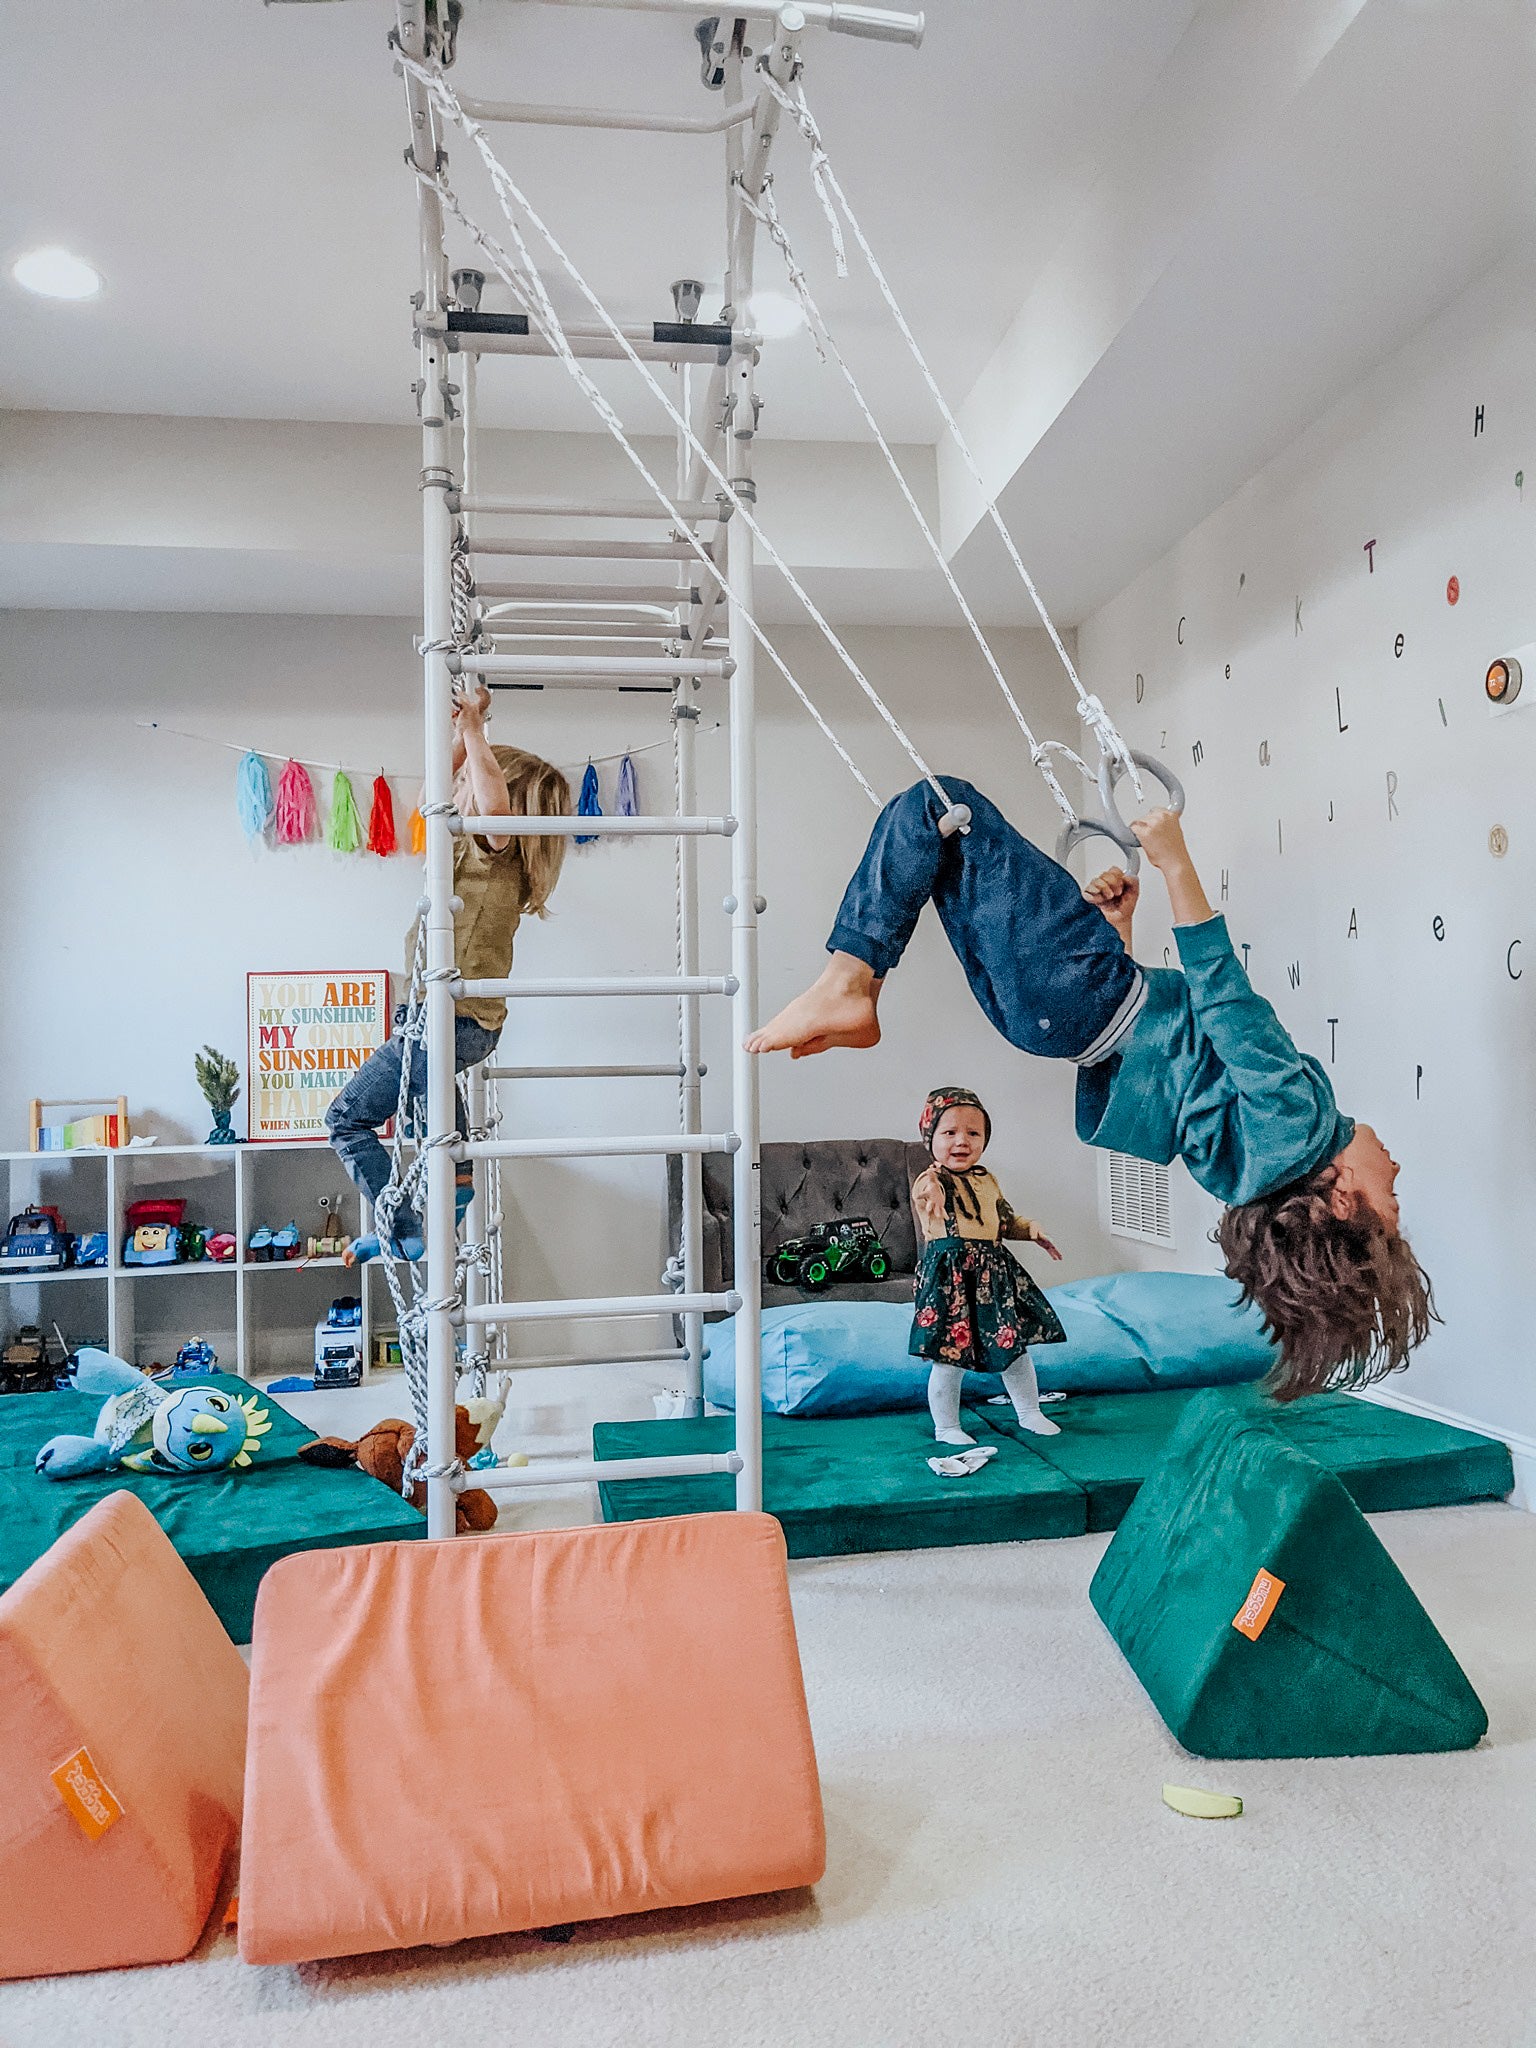 Design your home play gym unique for your space!